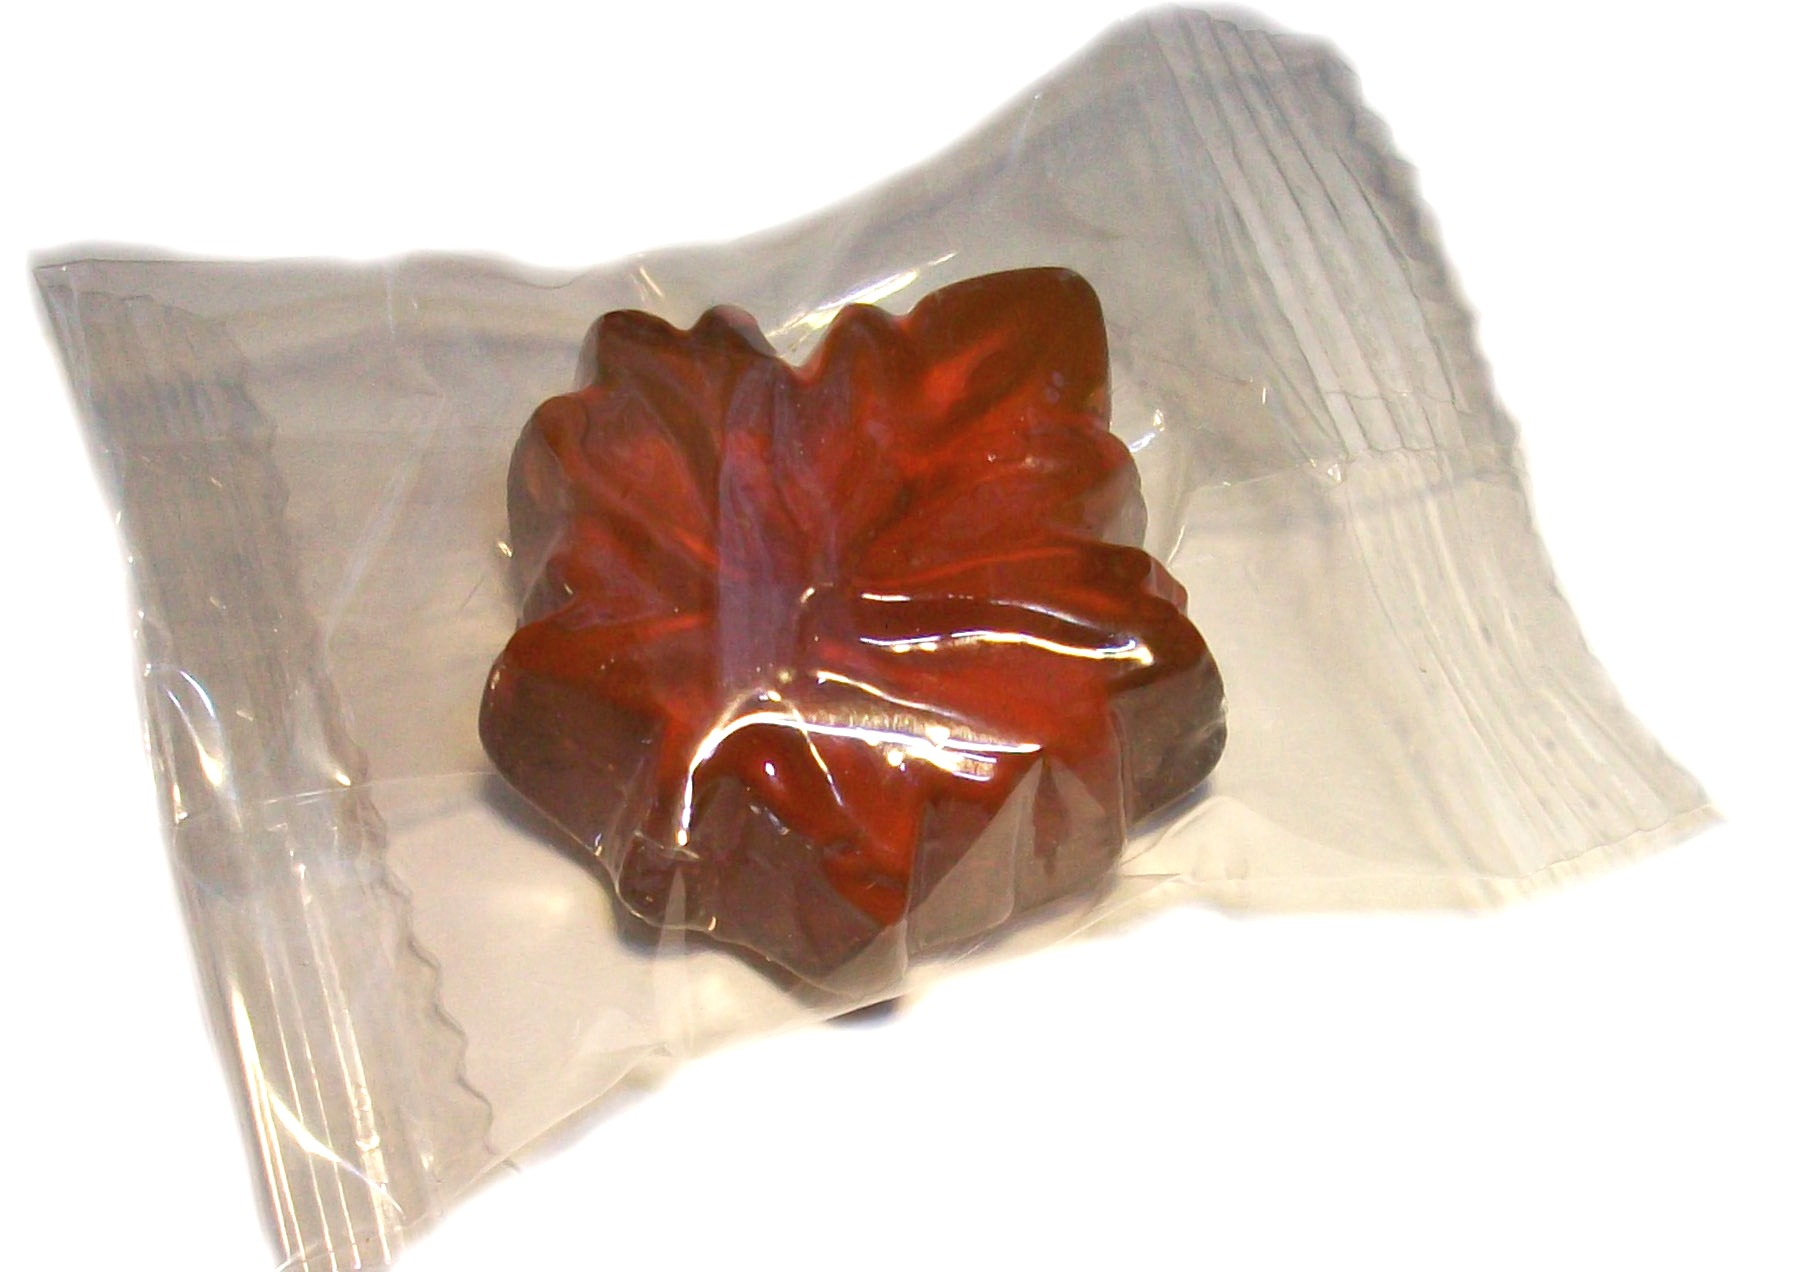 Clear hard maple syrup candies- bulk 10kg case